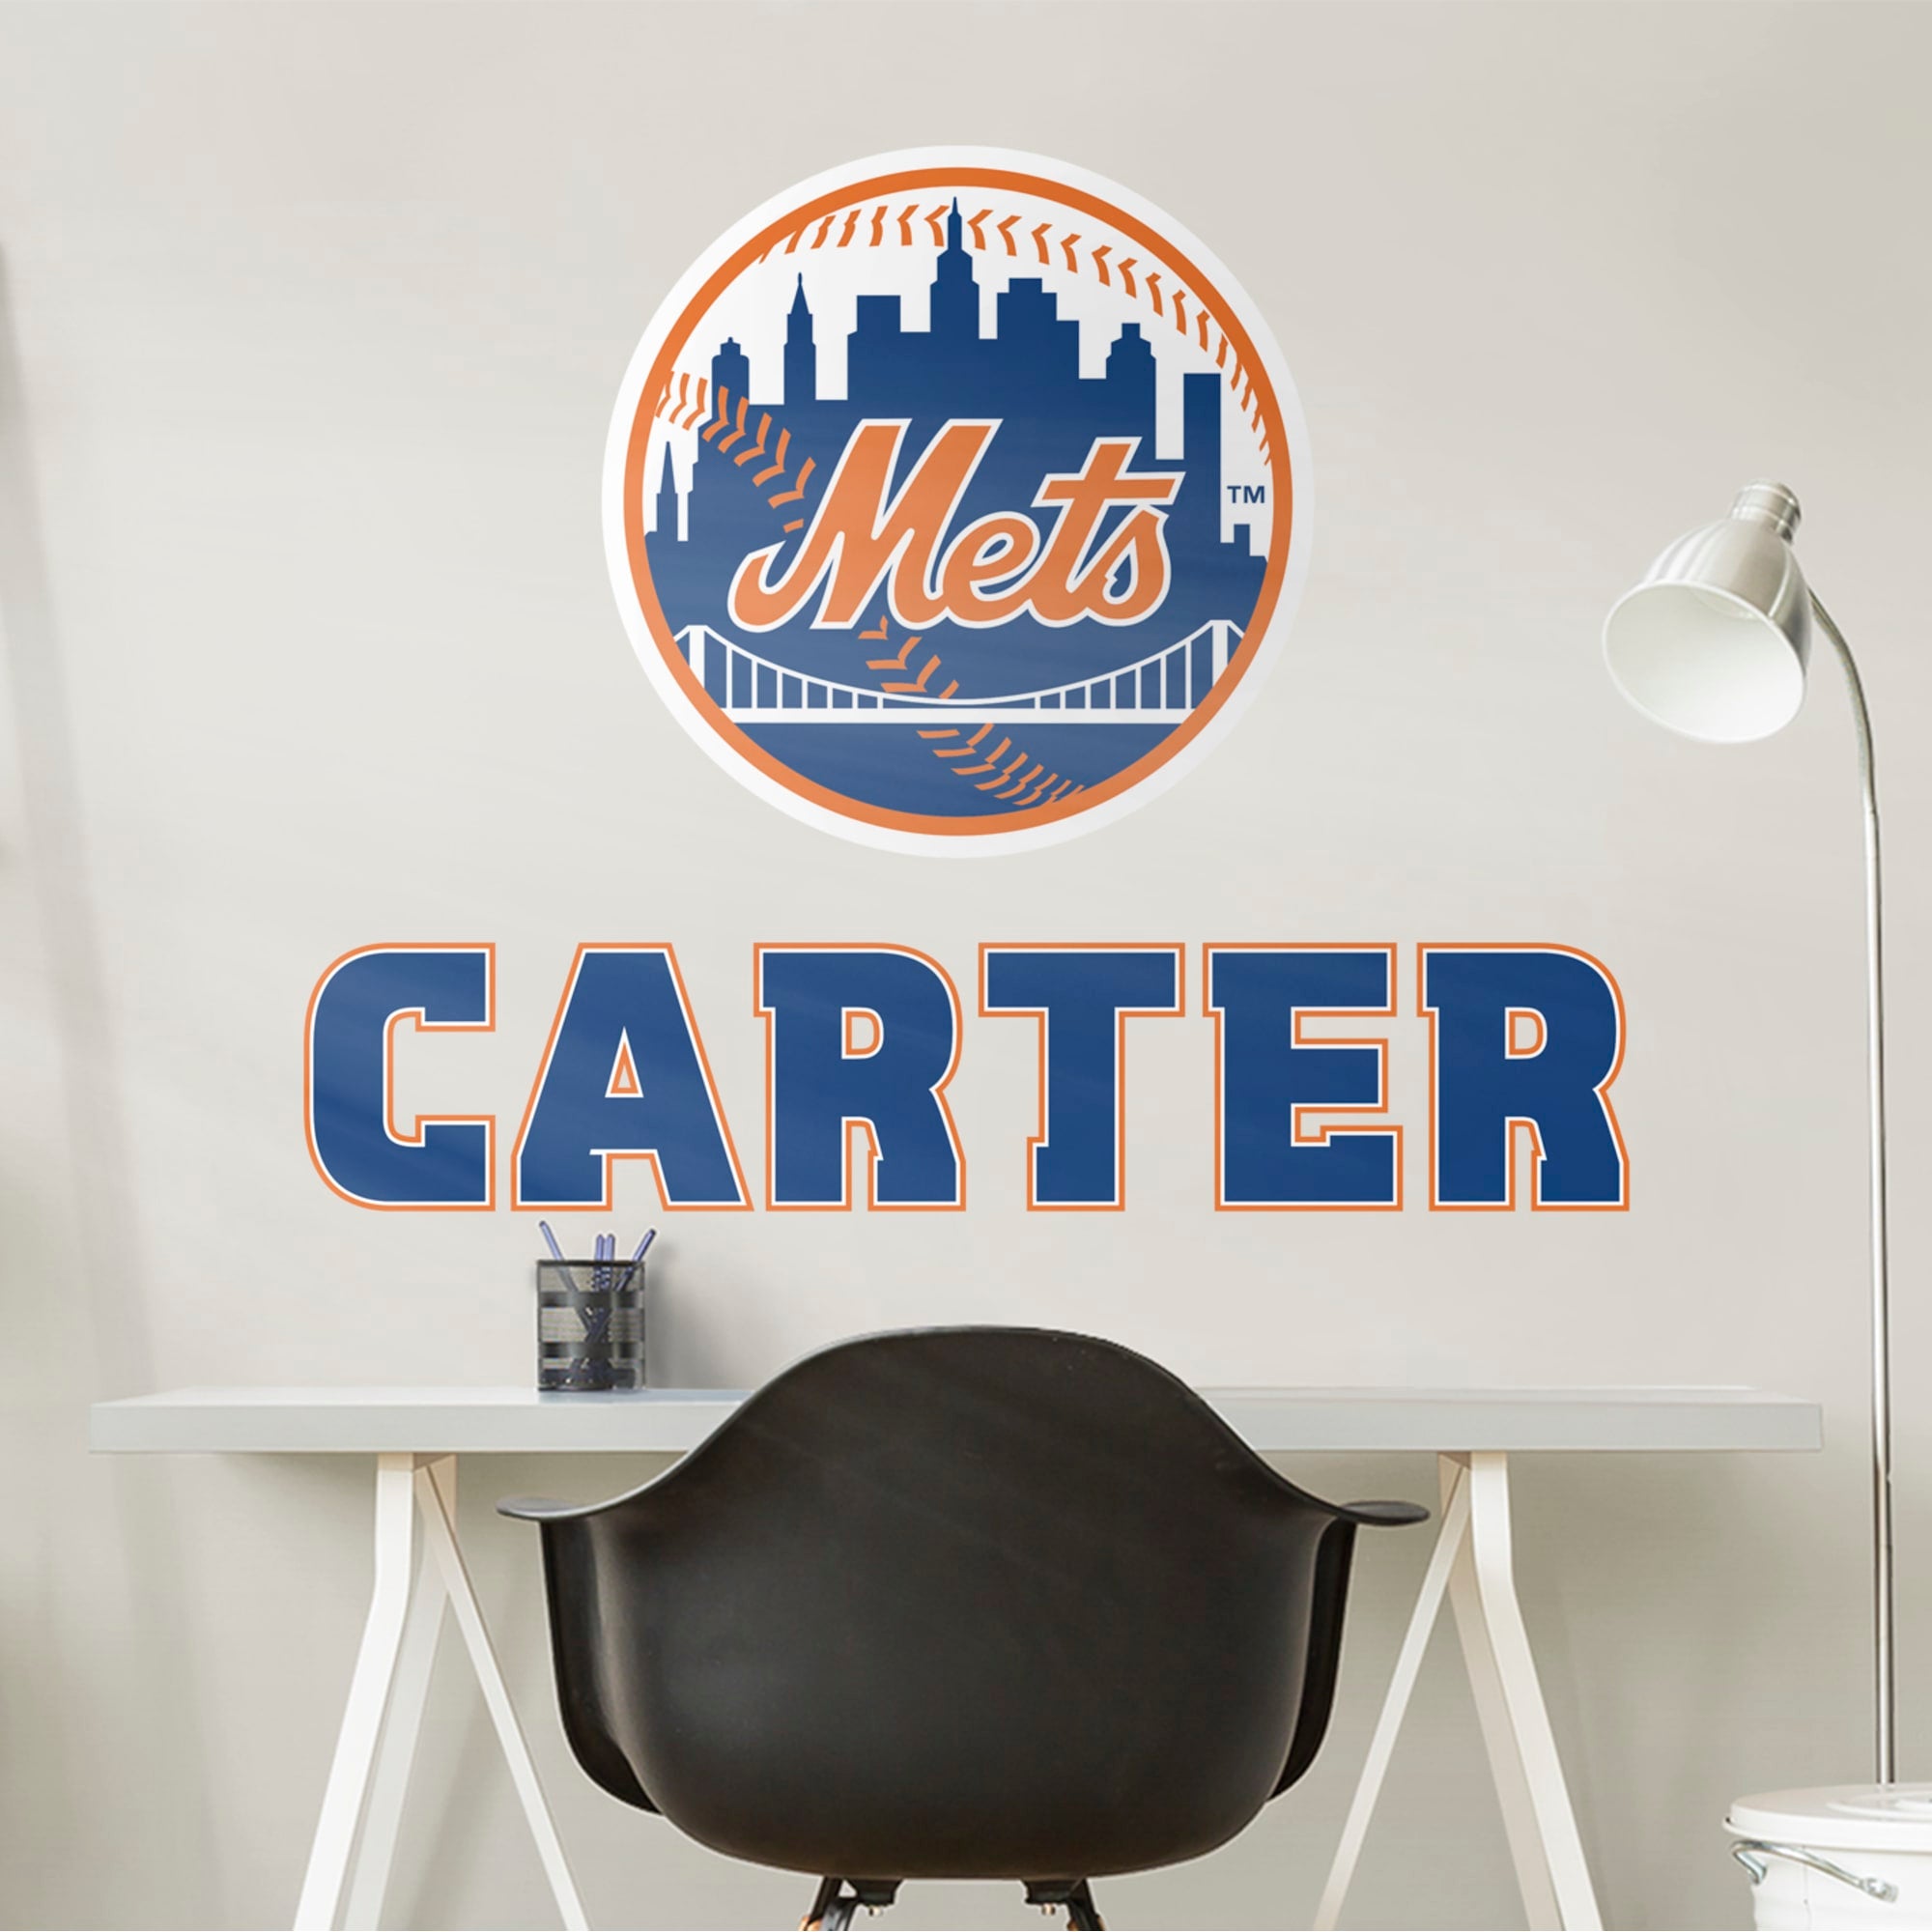 New York Mets: Stacked Personalized Name - Officially Licensed MLB Transfer Decal in Blue (52"W x 39.5"H) by Fathead | Vinyl